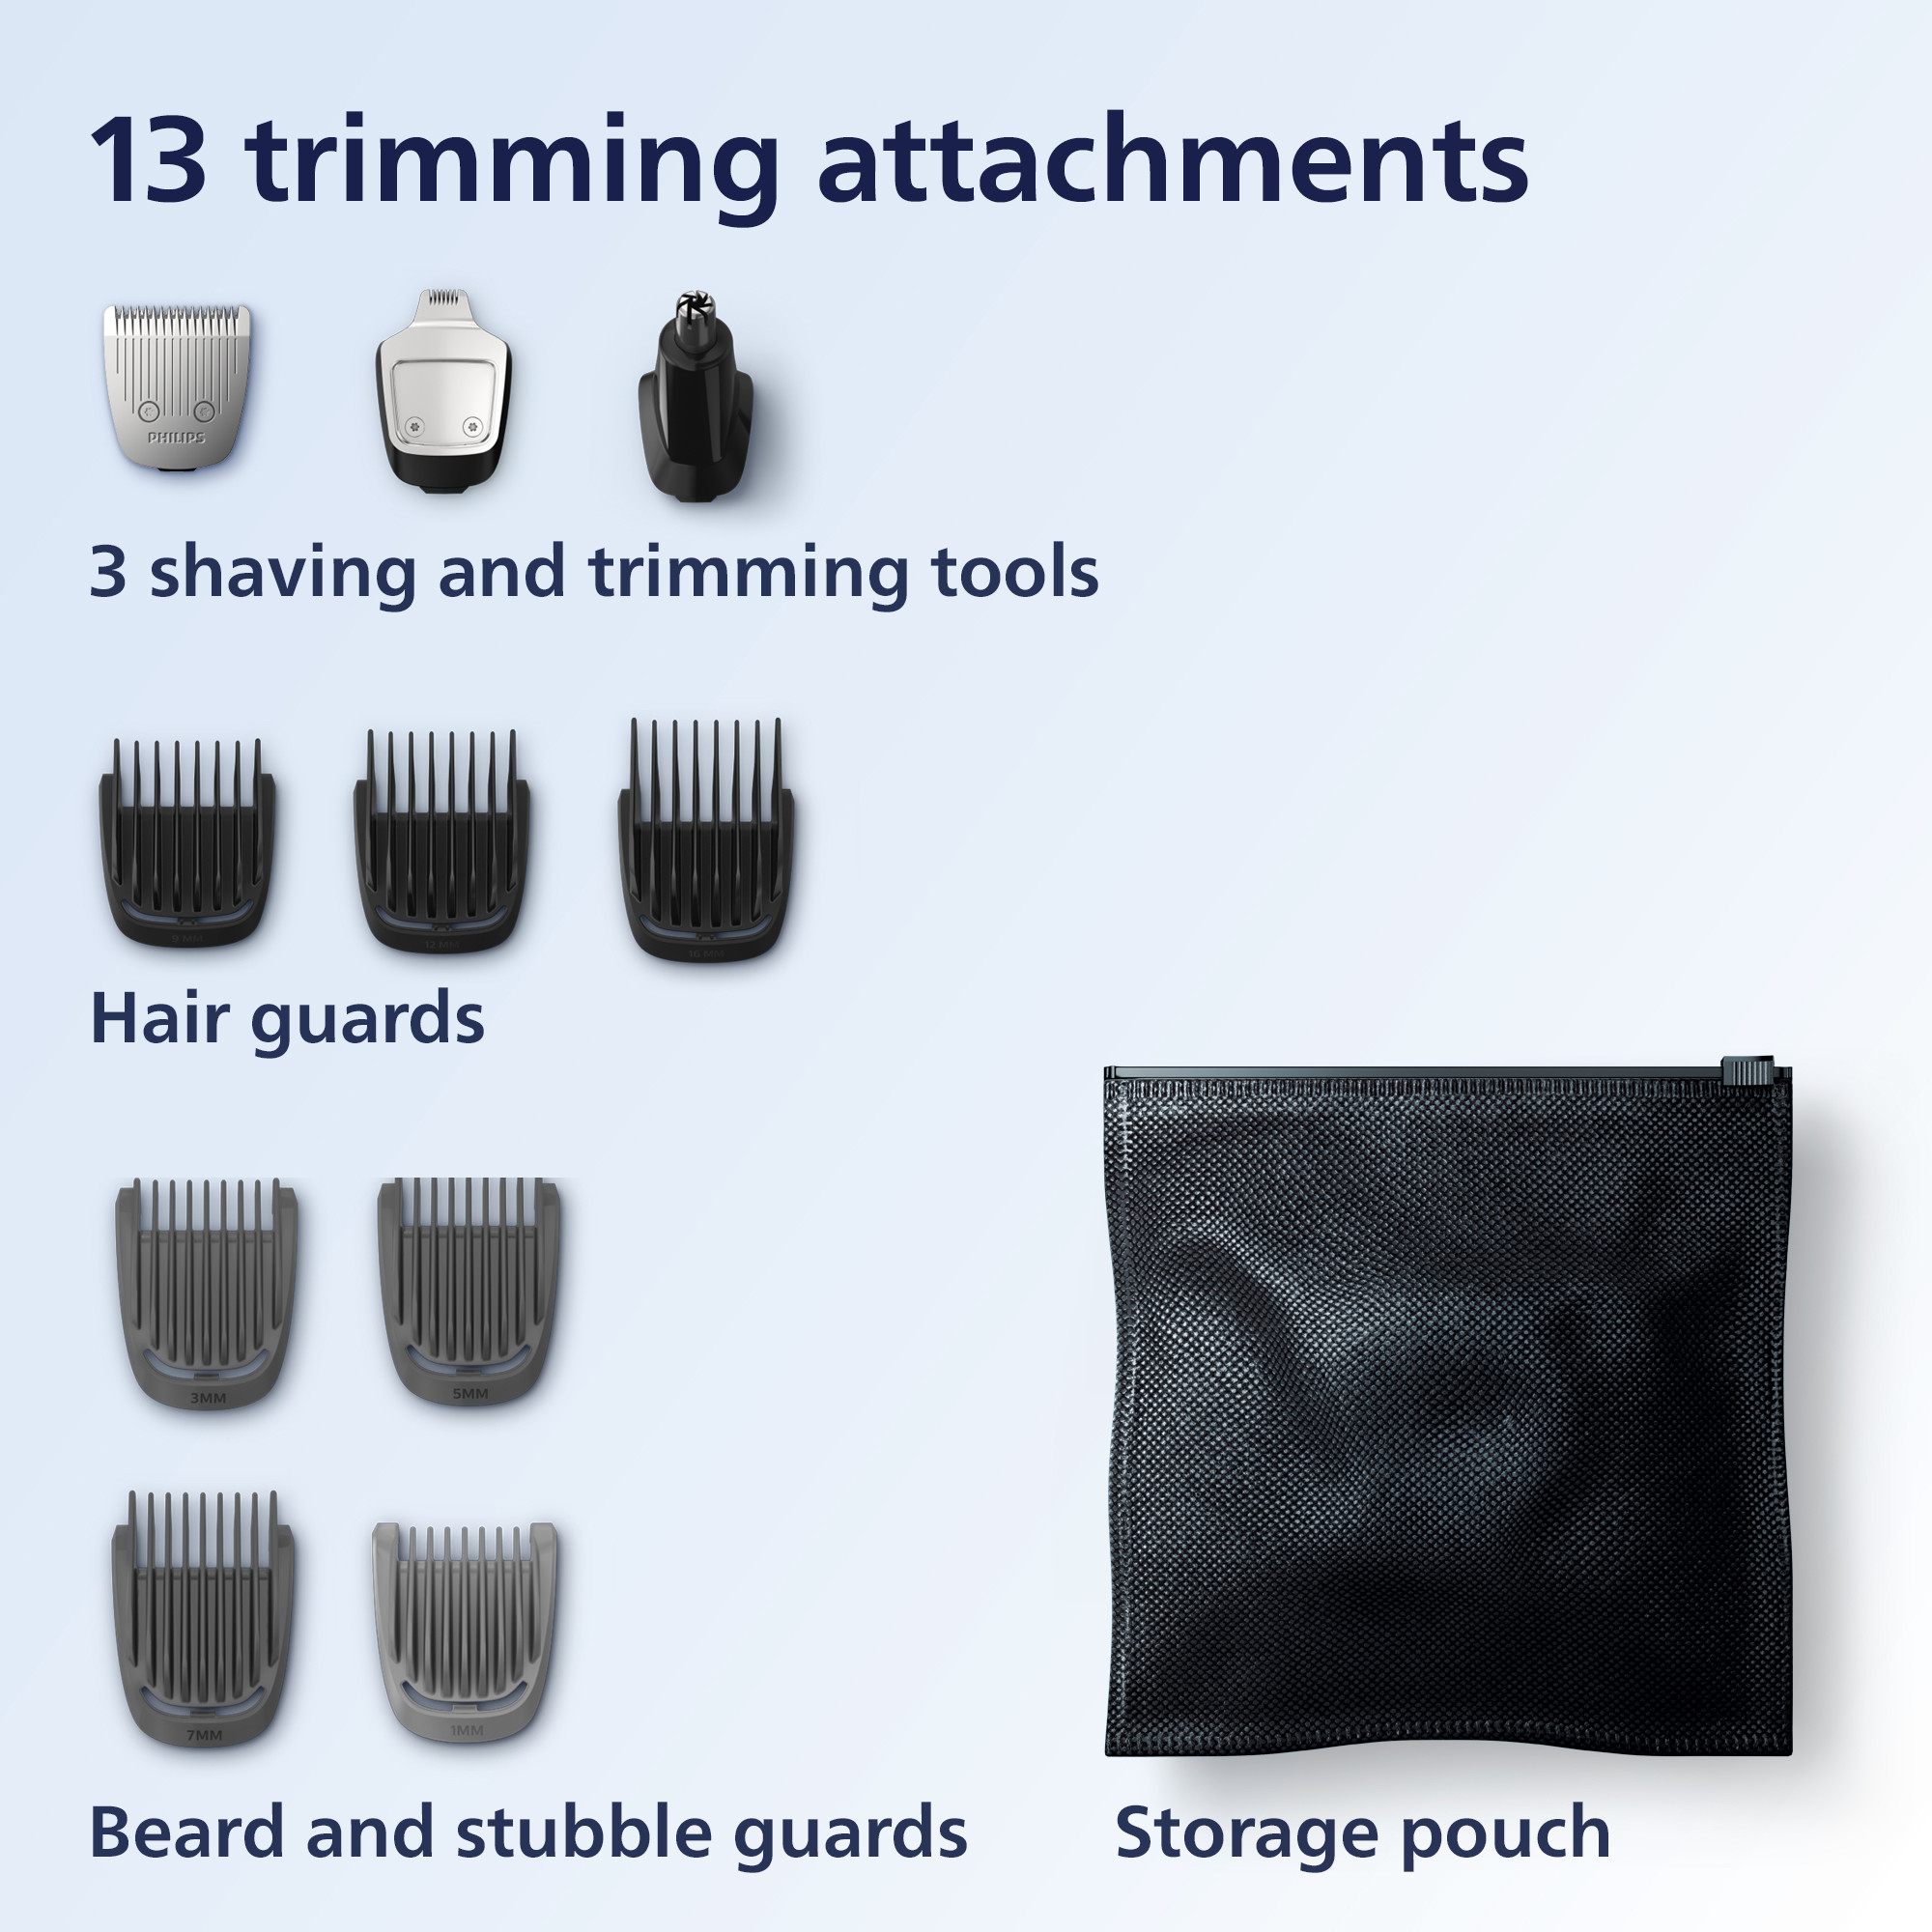 Philips Norelco Multi Groomer - 13 Piece Mens Grooming Kit For Beard, Face, Nose, and Ear Hair Trimmer and Hair Clipper - No Blade Oil Needed, MG3740/40 - image 2 of 16